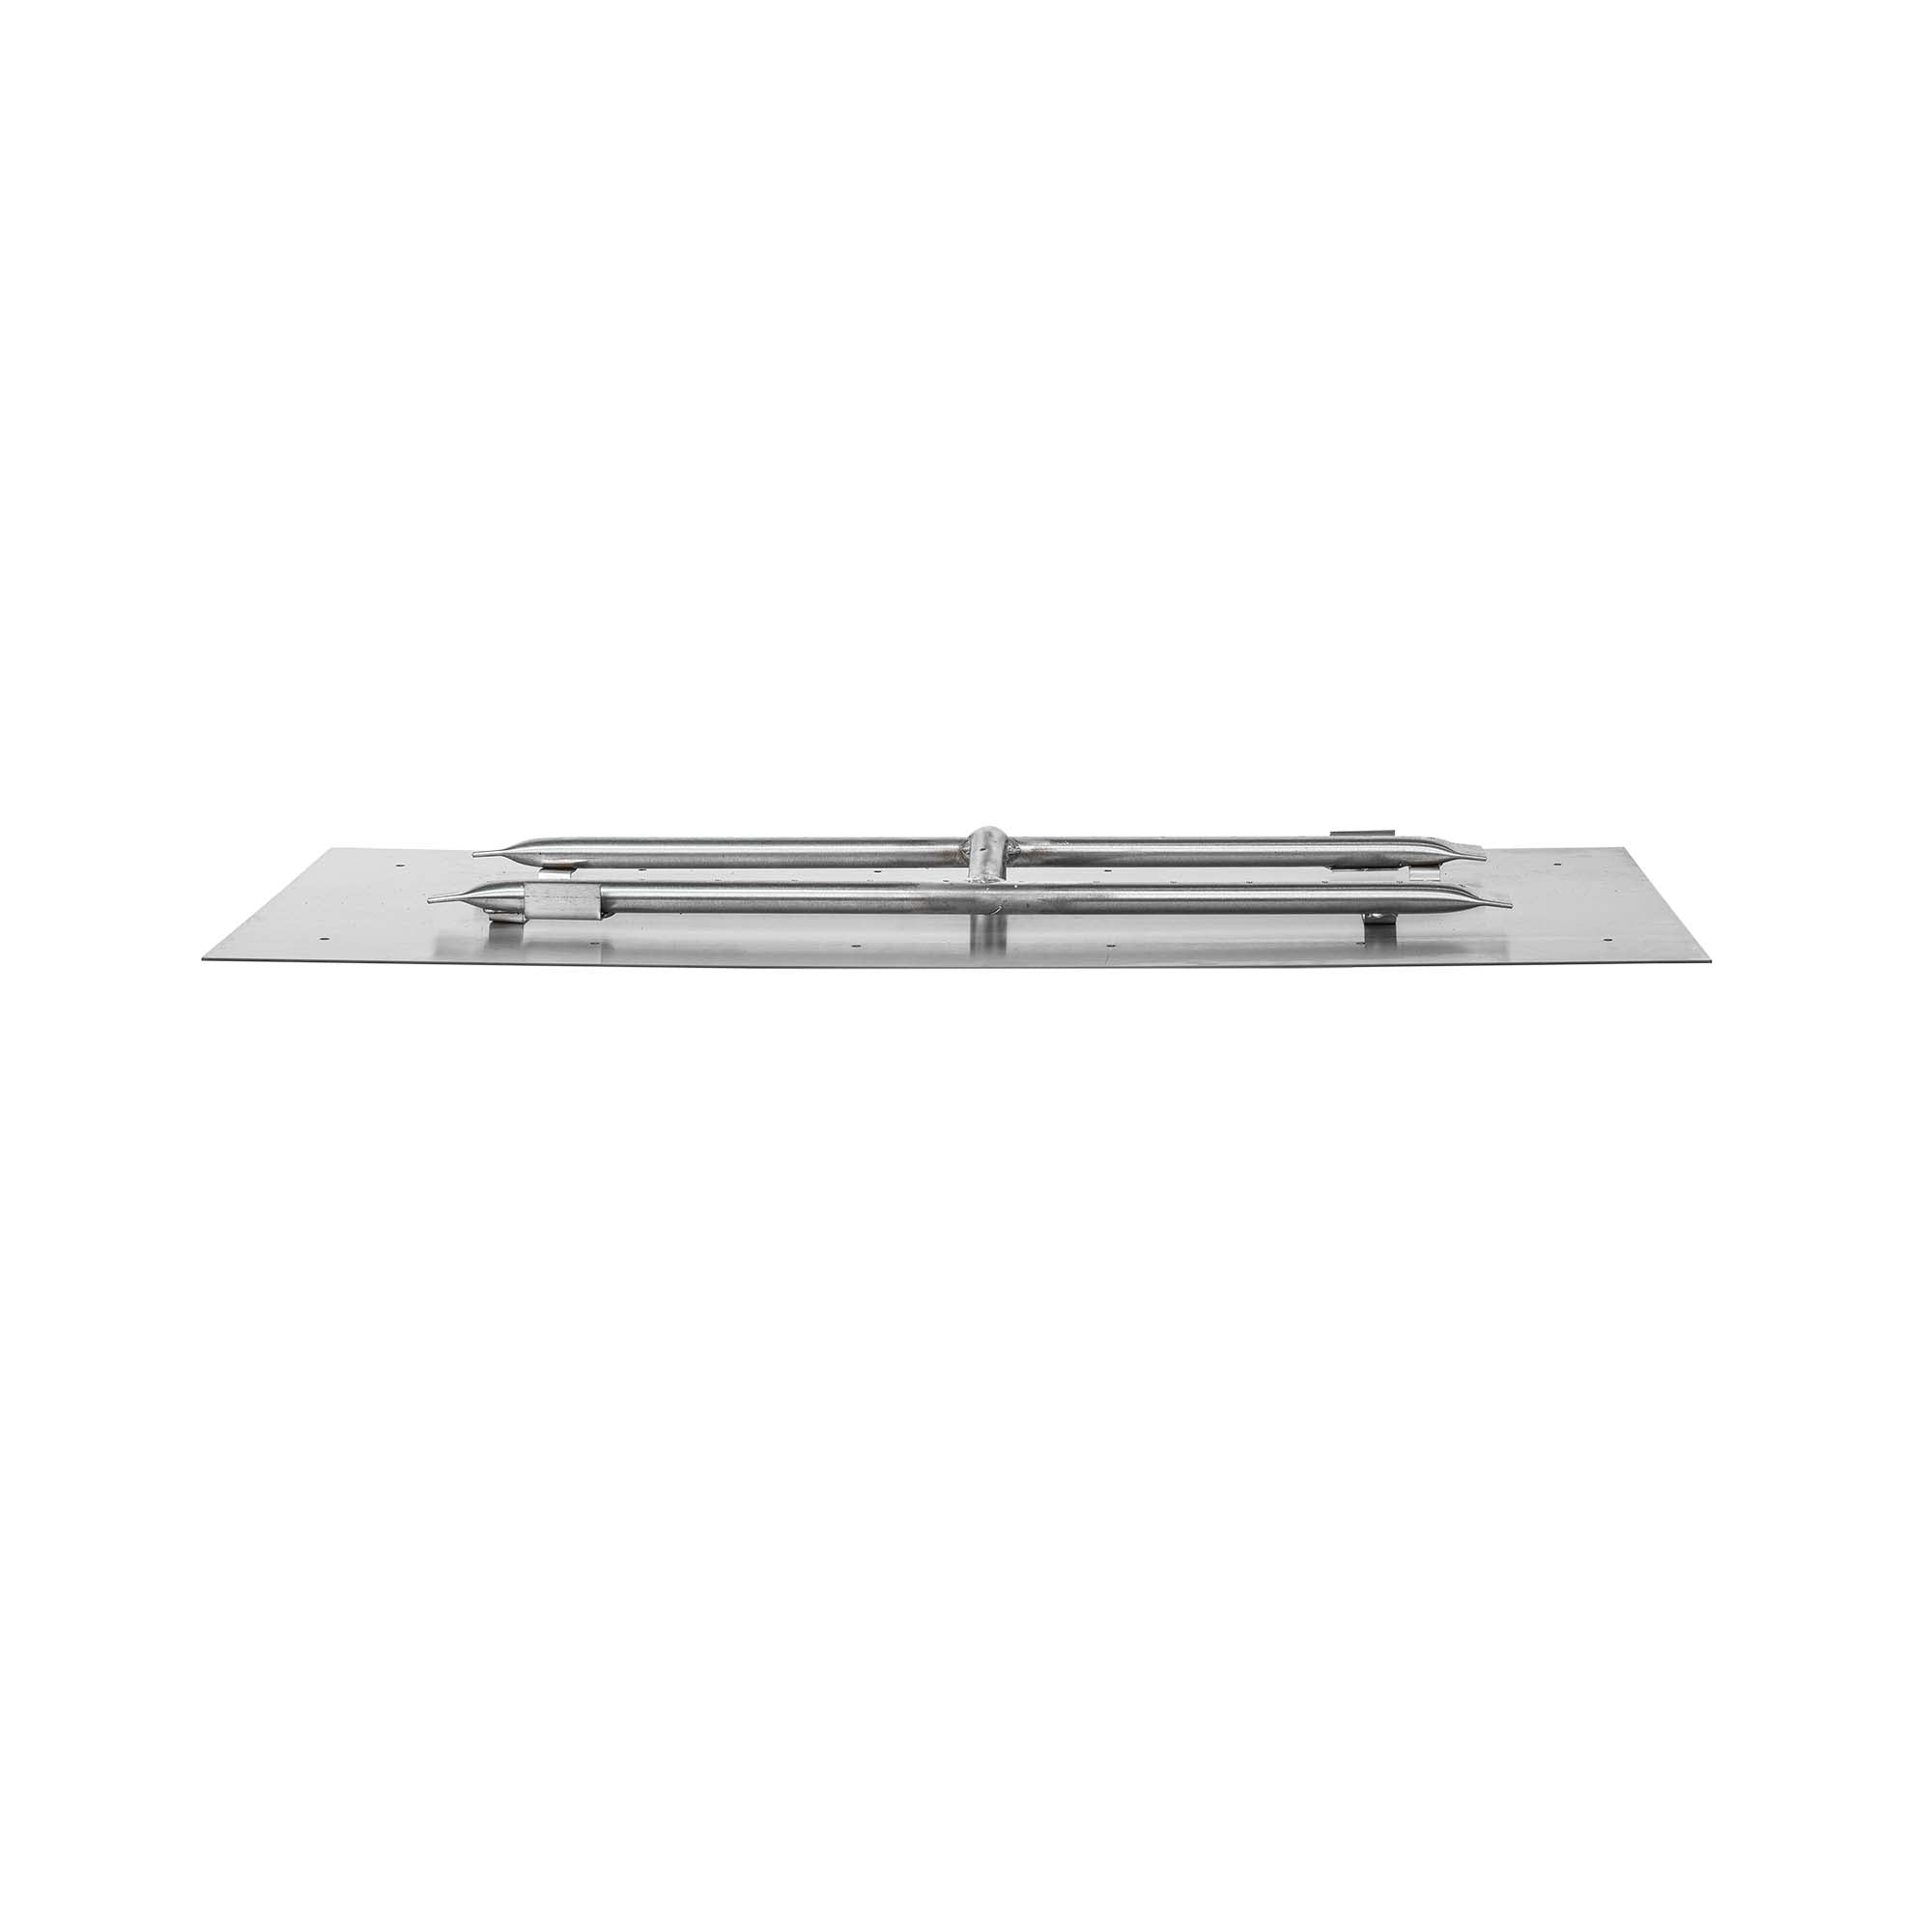 The Outdoor Plus Rectangular Flat Pan 12" With Stainless Steel 'H' Burner